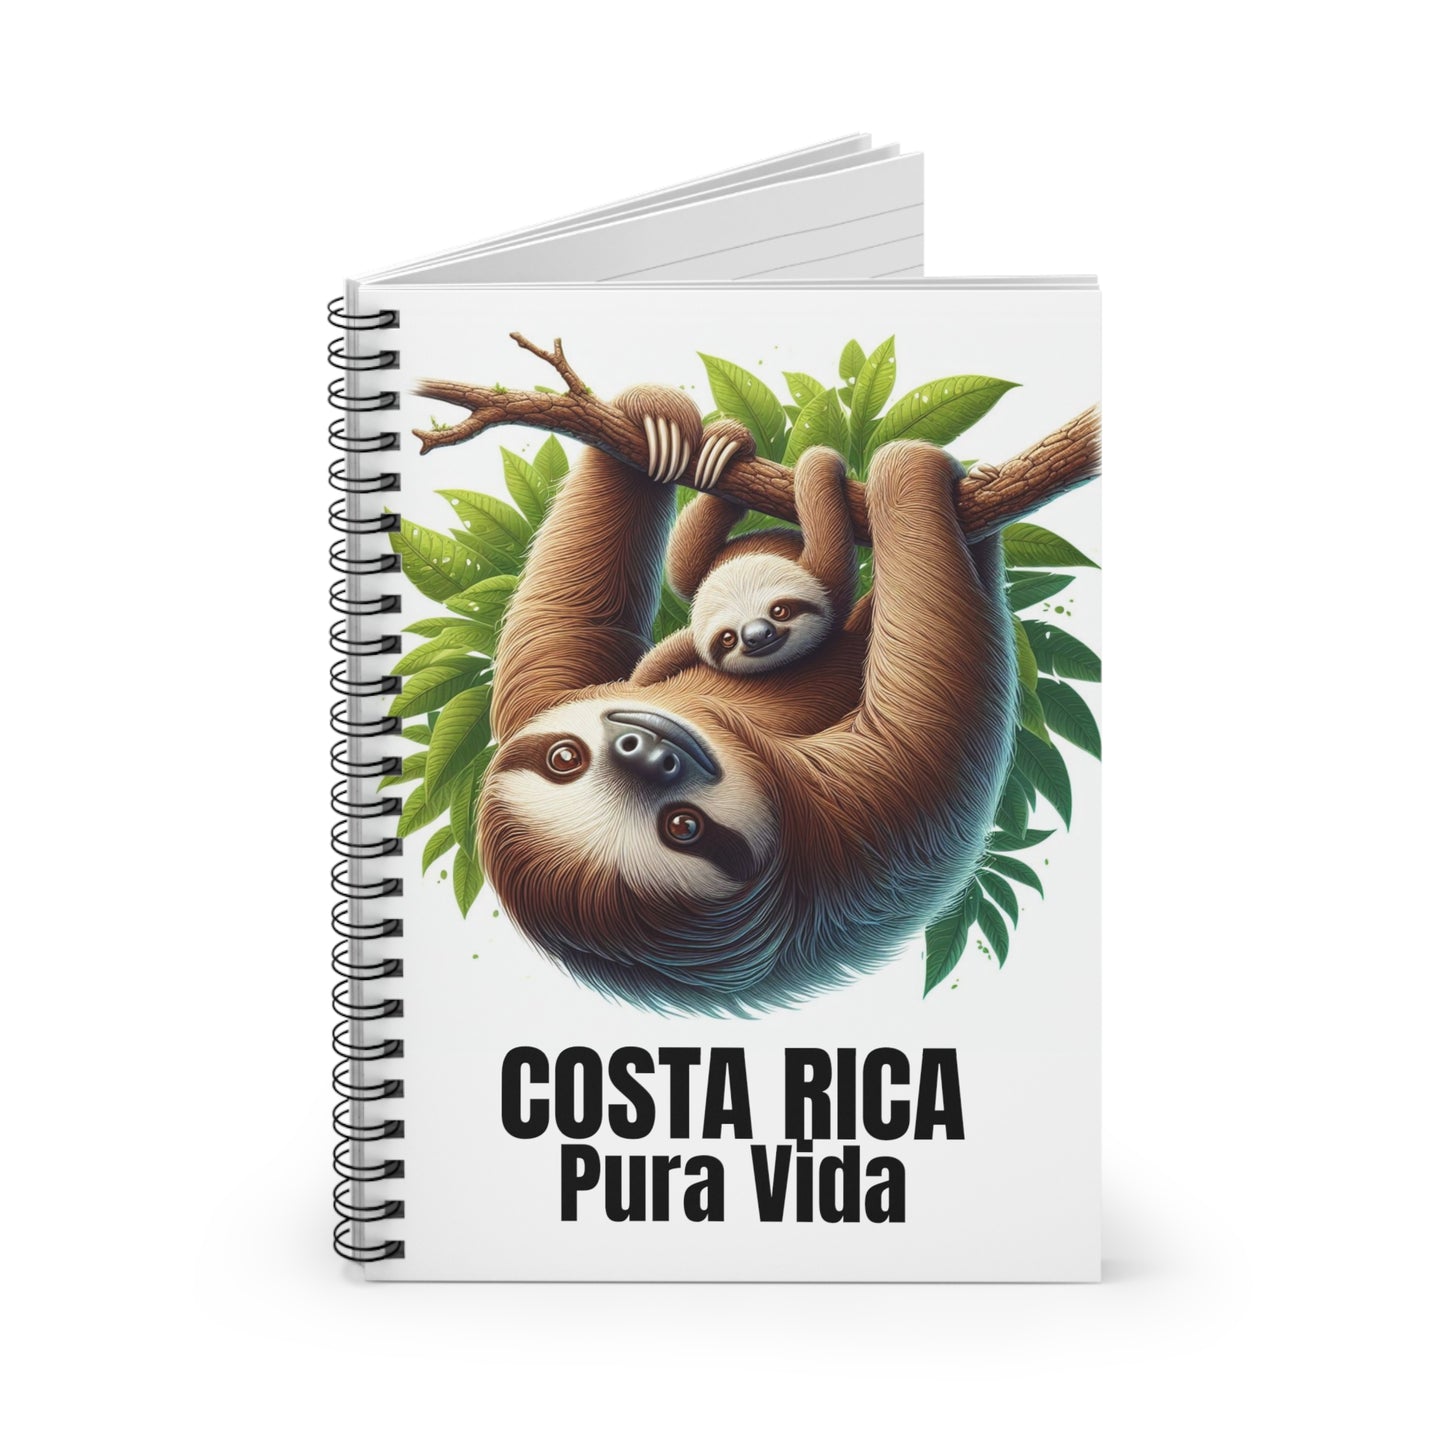 Costa Rica Pura Vida Sloth Mother and Baby Spiral Notebook - Ruled Line